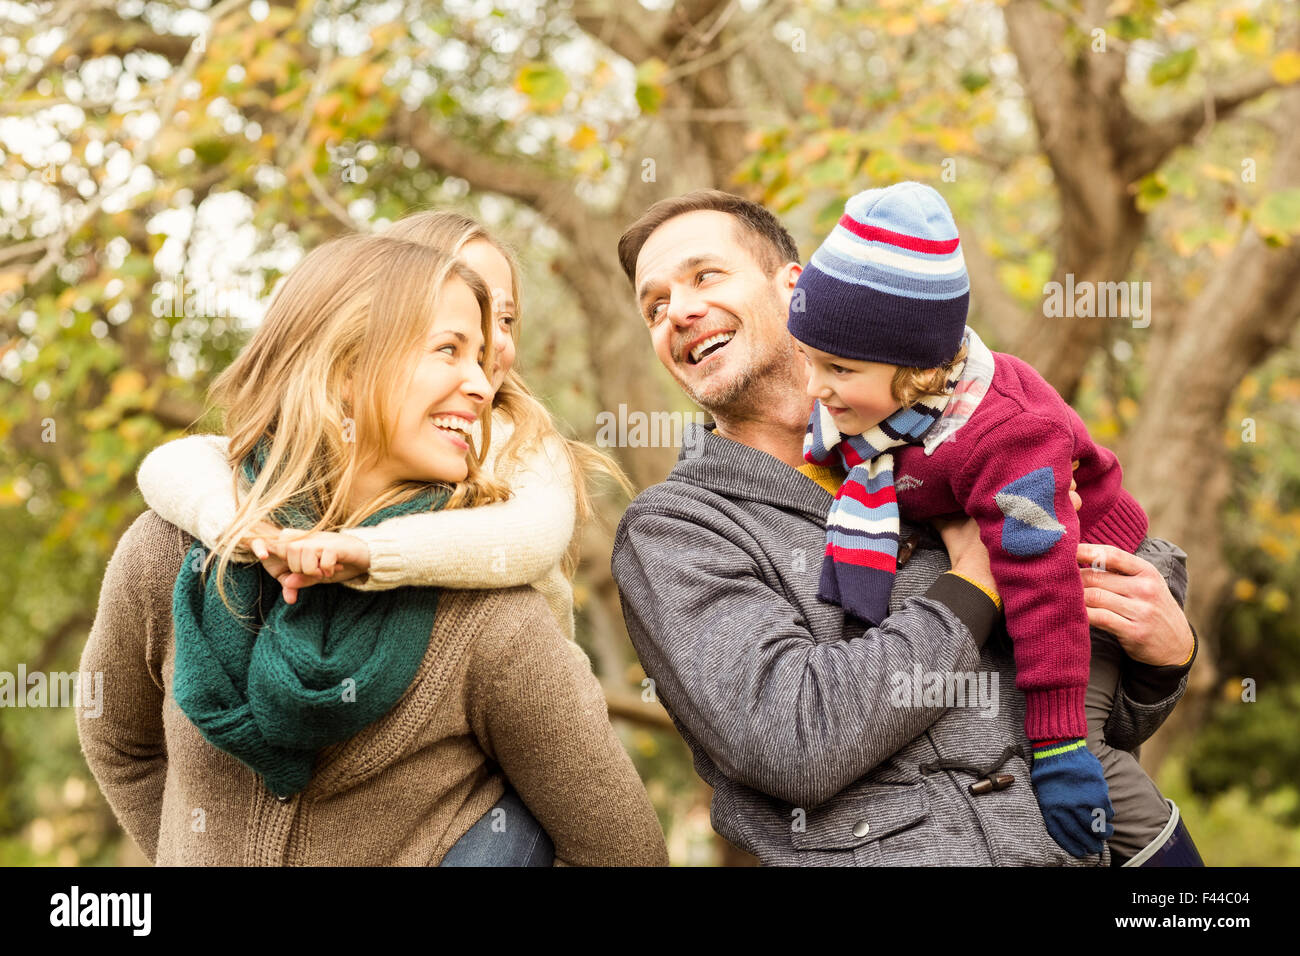 Smiling young family looking each other Stock Photo